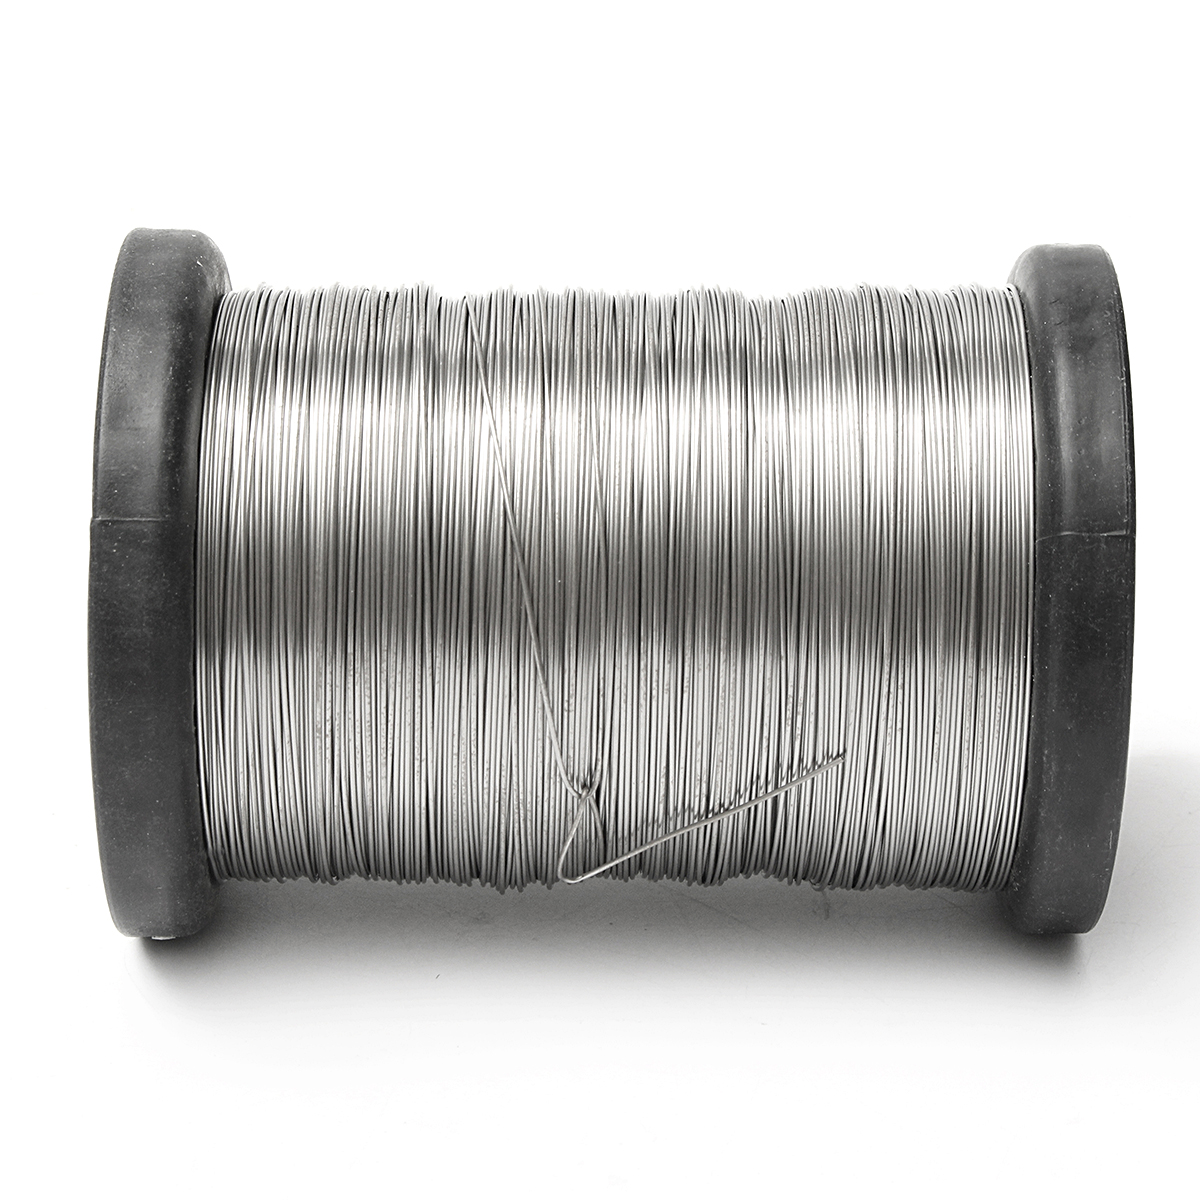 500g-05mm-Stainless-Steel-Wire-Bee-Hive-Frame-Foundation-Wire-1112570-3